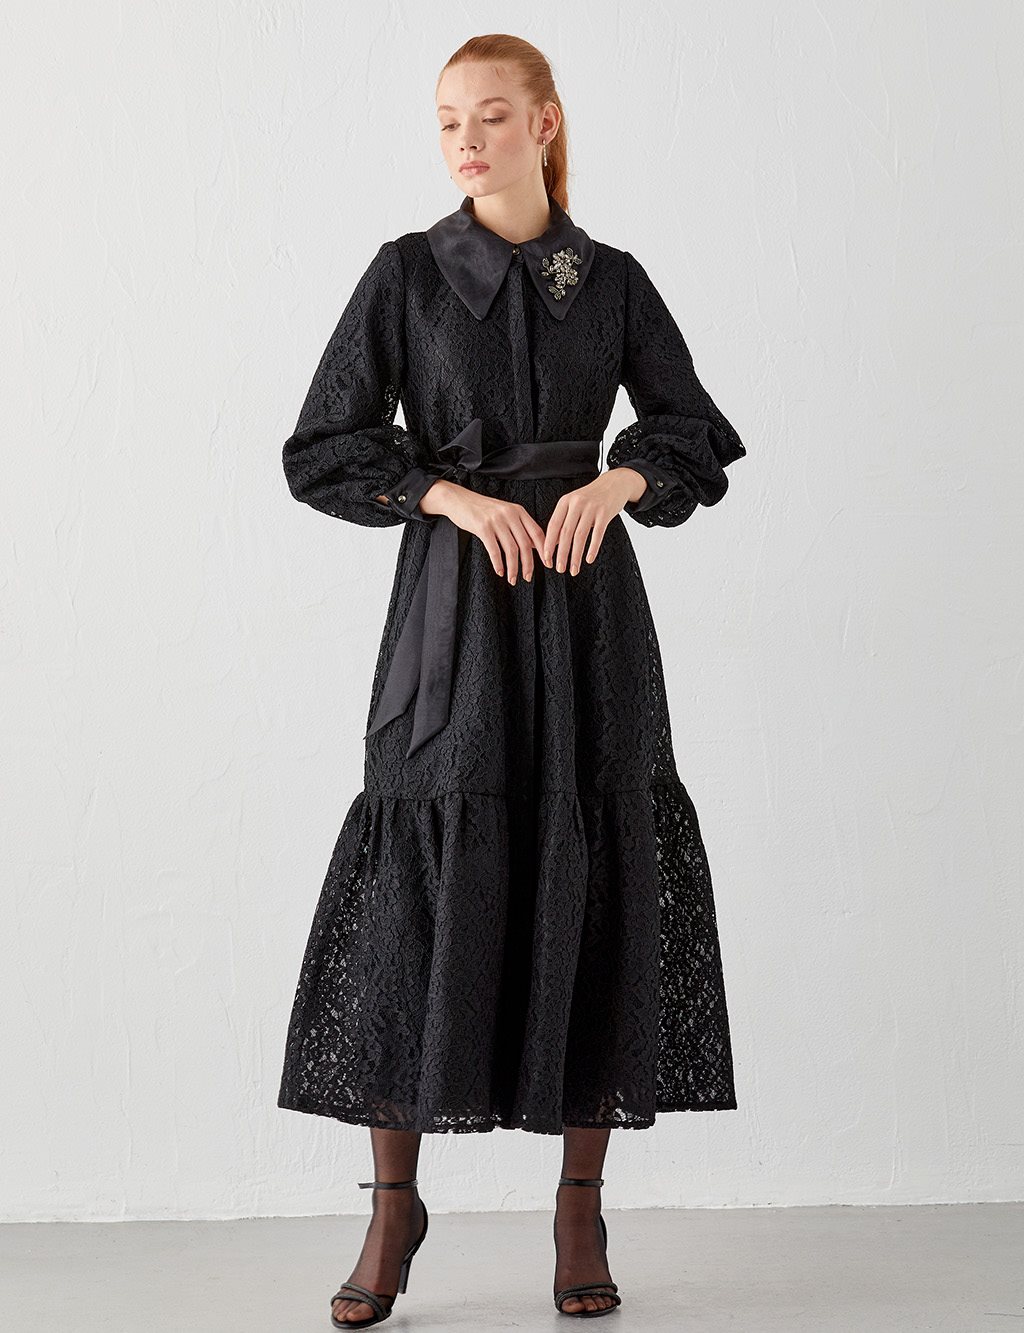 Belted Full Length Lace Dress Black